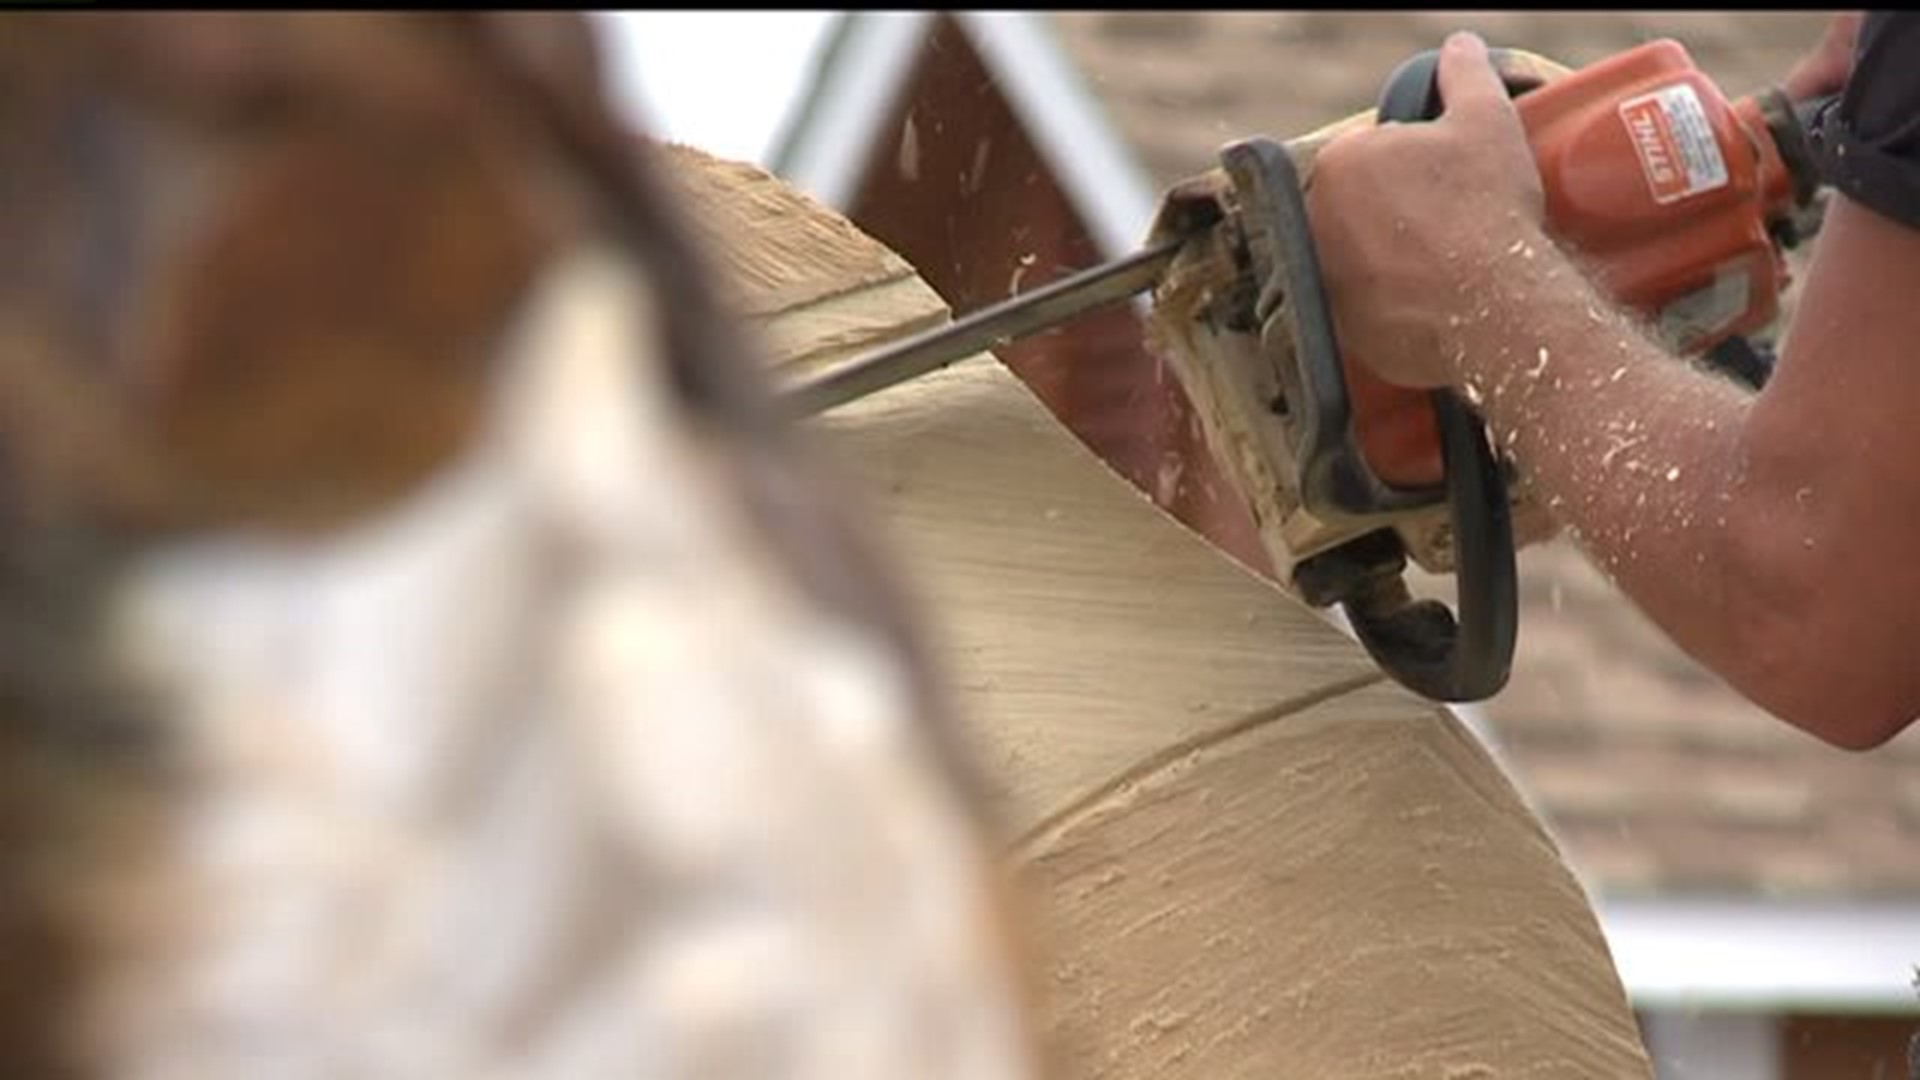 Chainsaw wood carver uses talents to help 3-year-old girl